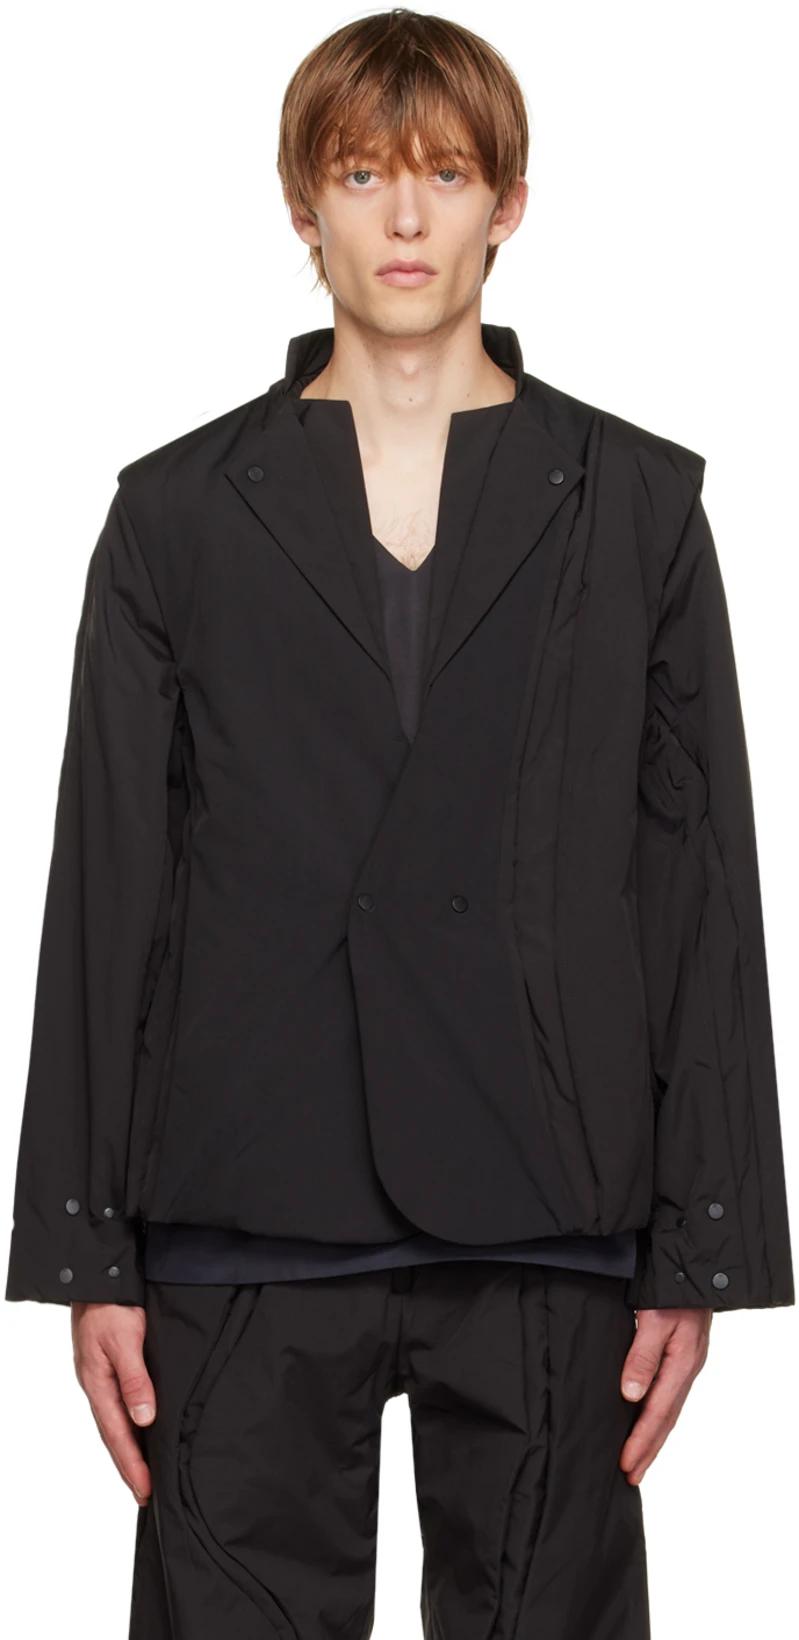 Black Spin Crevice Blazer by AENRMOUS